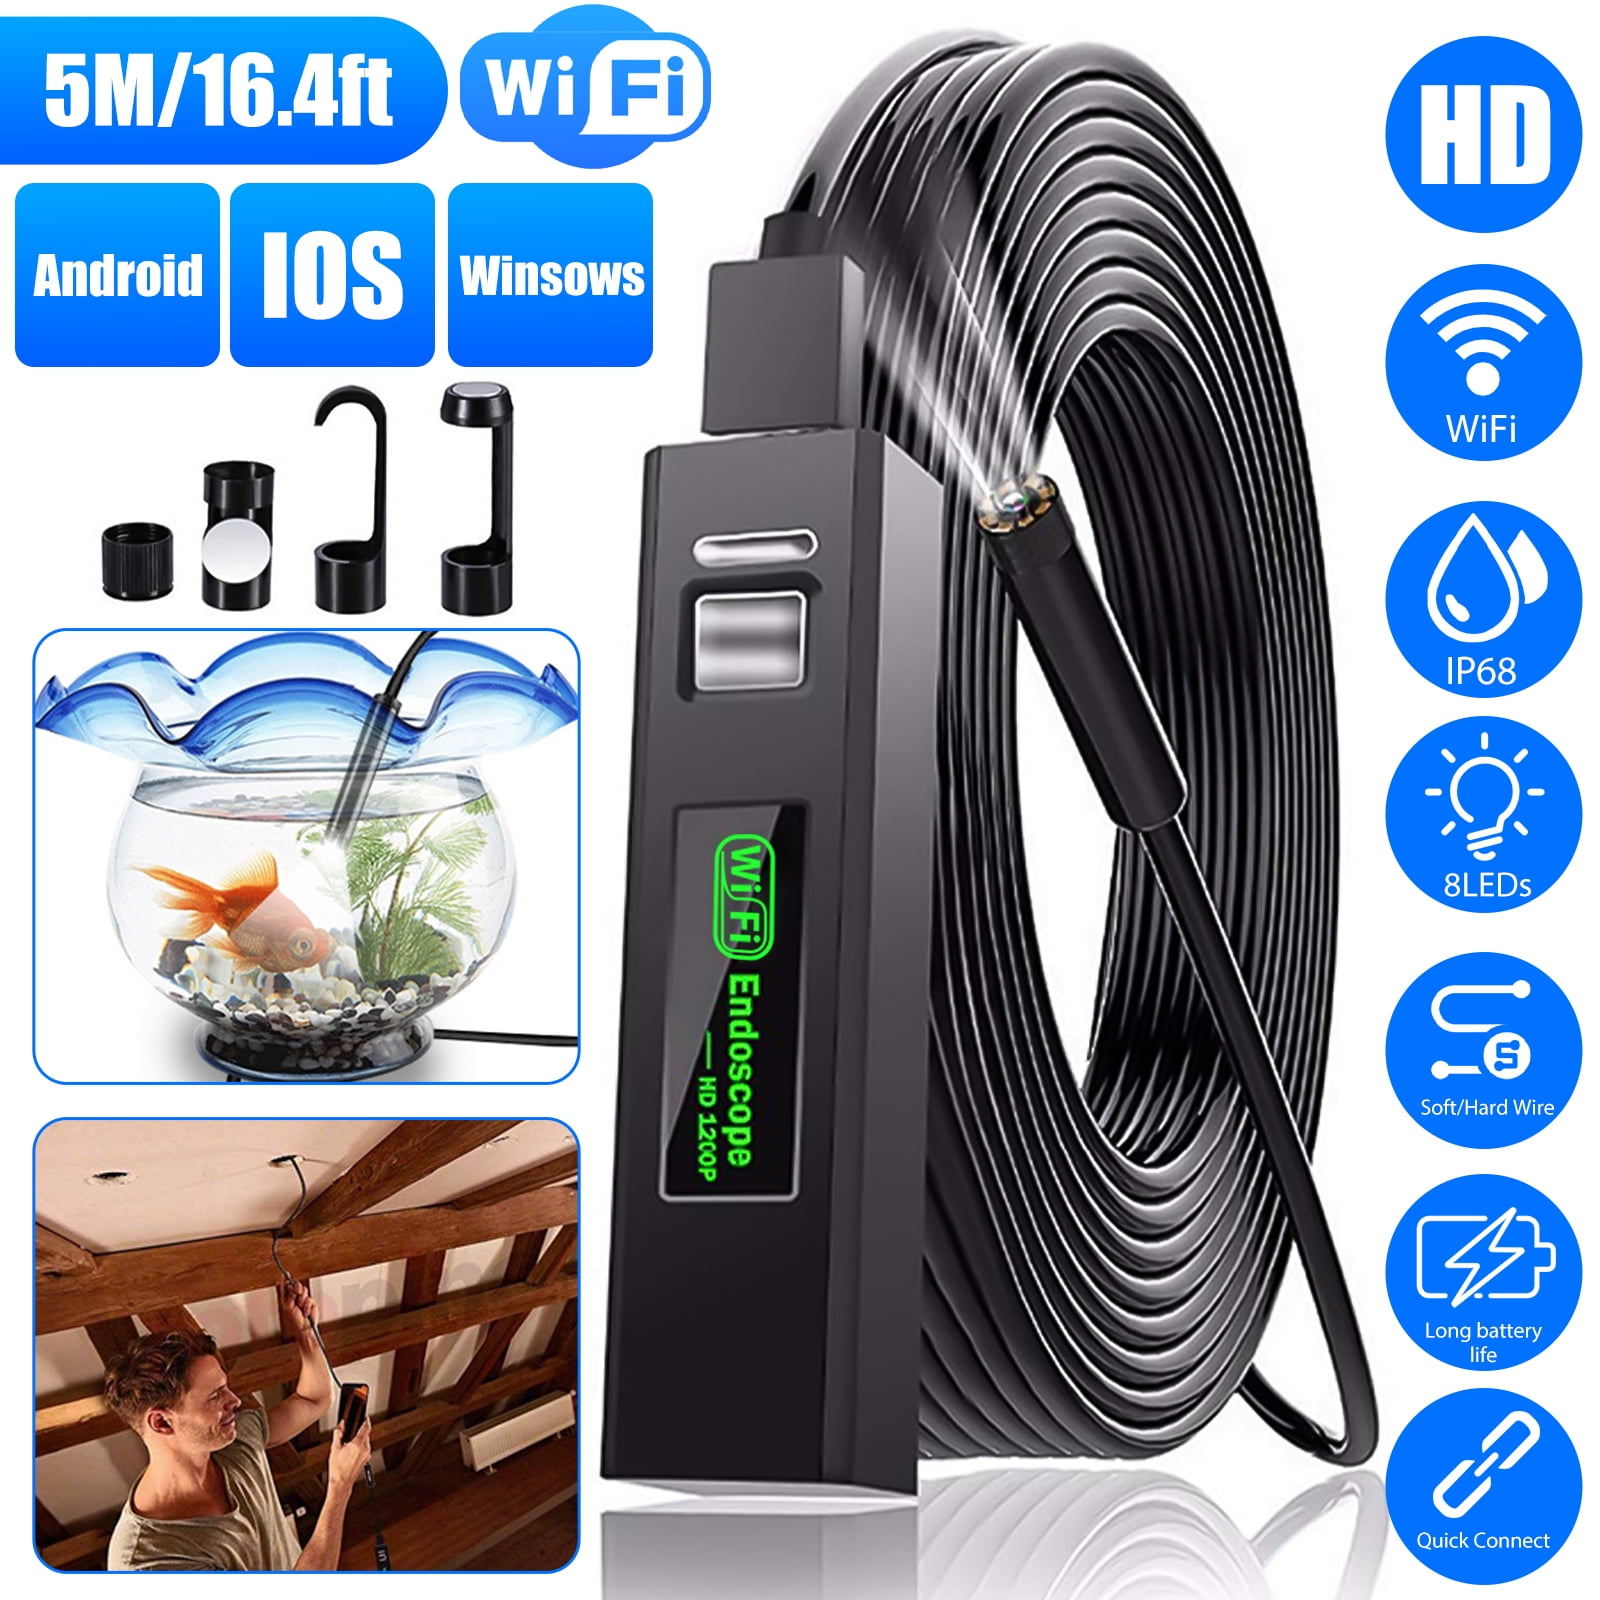 Wireless USB Inspection Camera, Waterproof Endoscope Inspection Camera with  6 LED Lights, 3 in 1 HD Endoscope Camera, Suitable for PC, Laptop